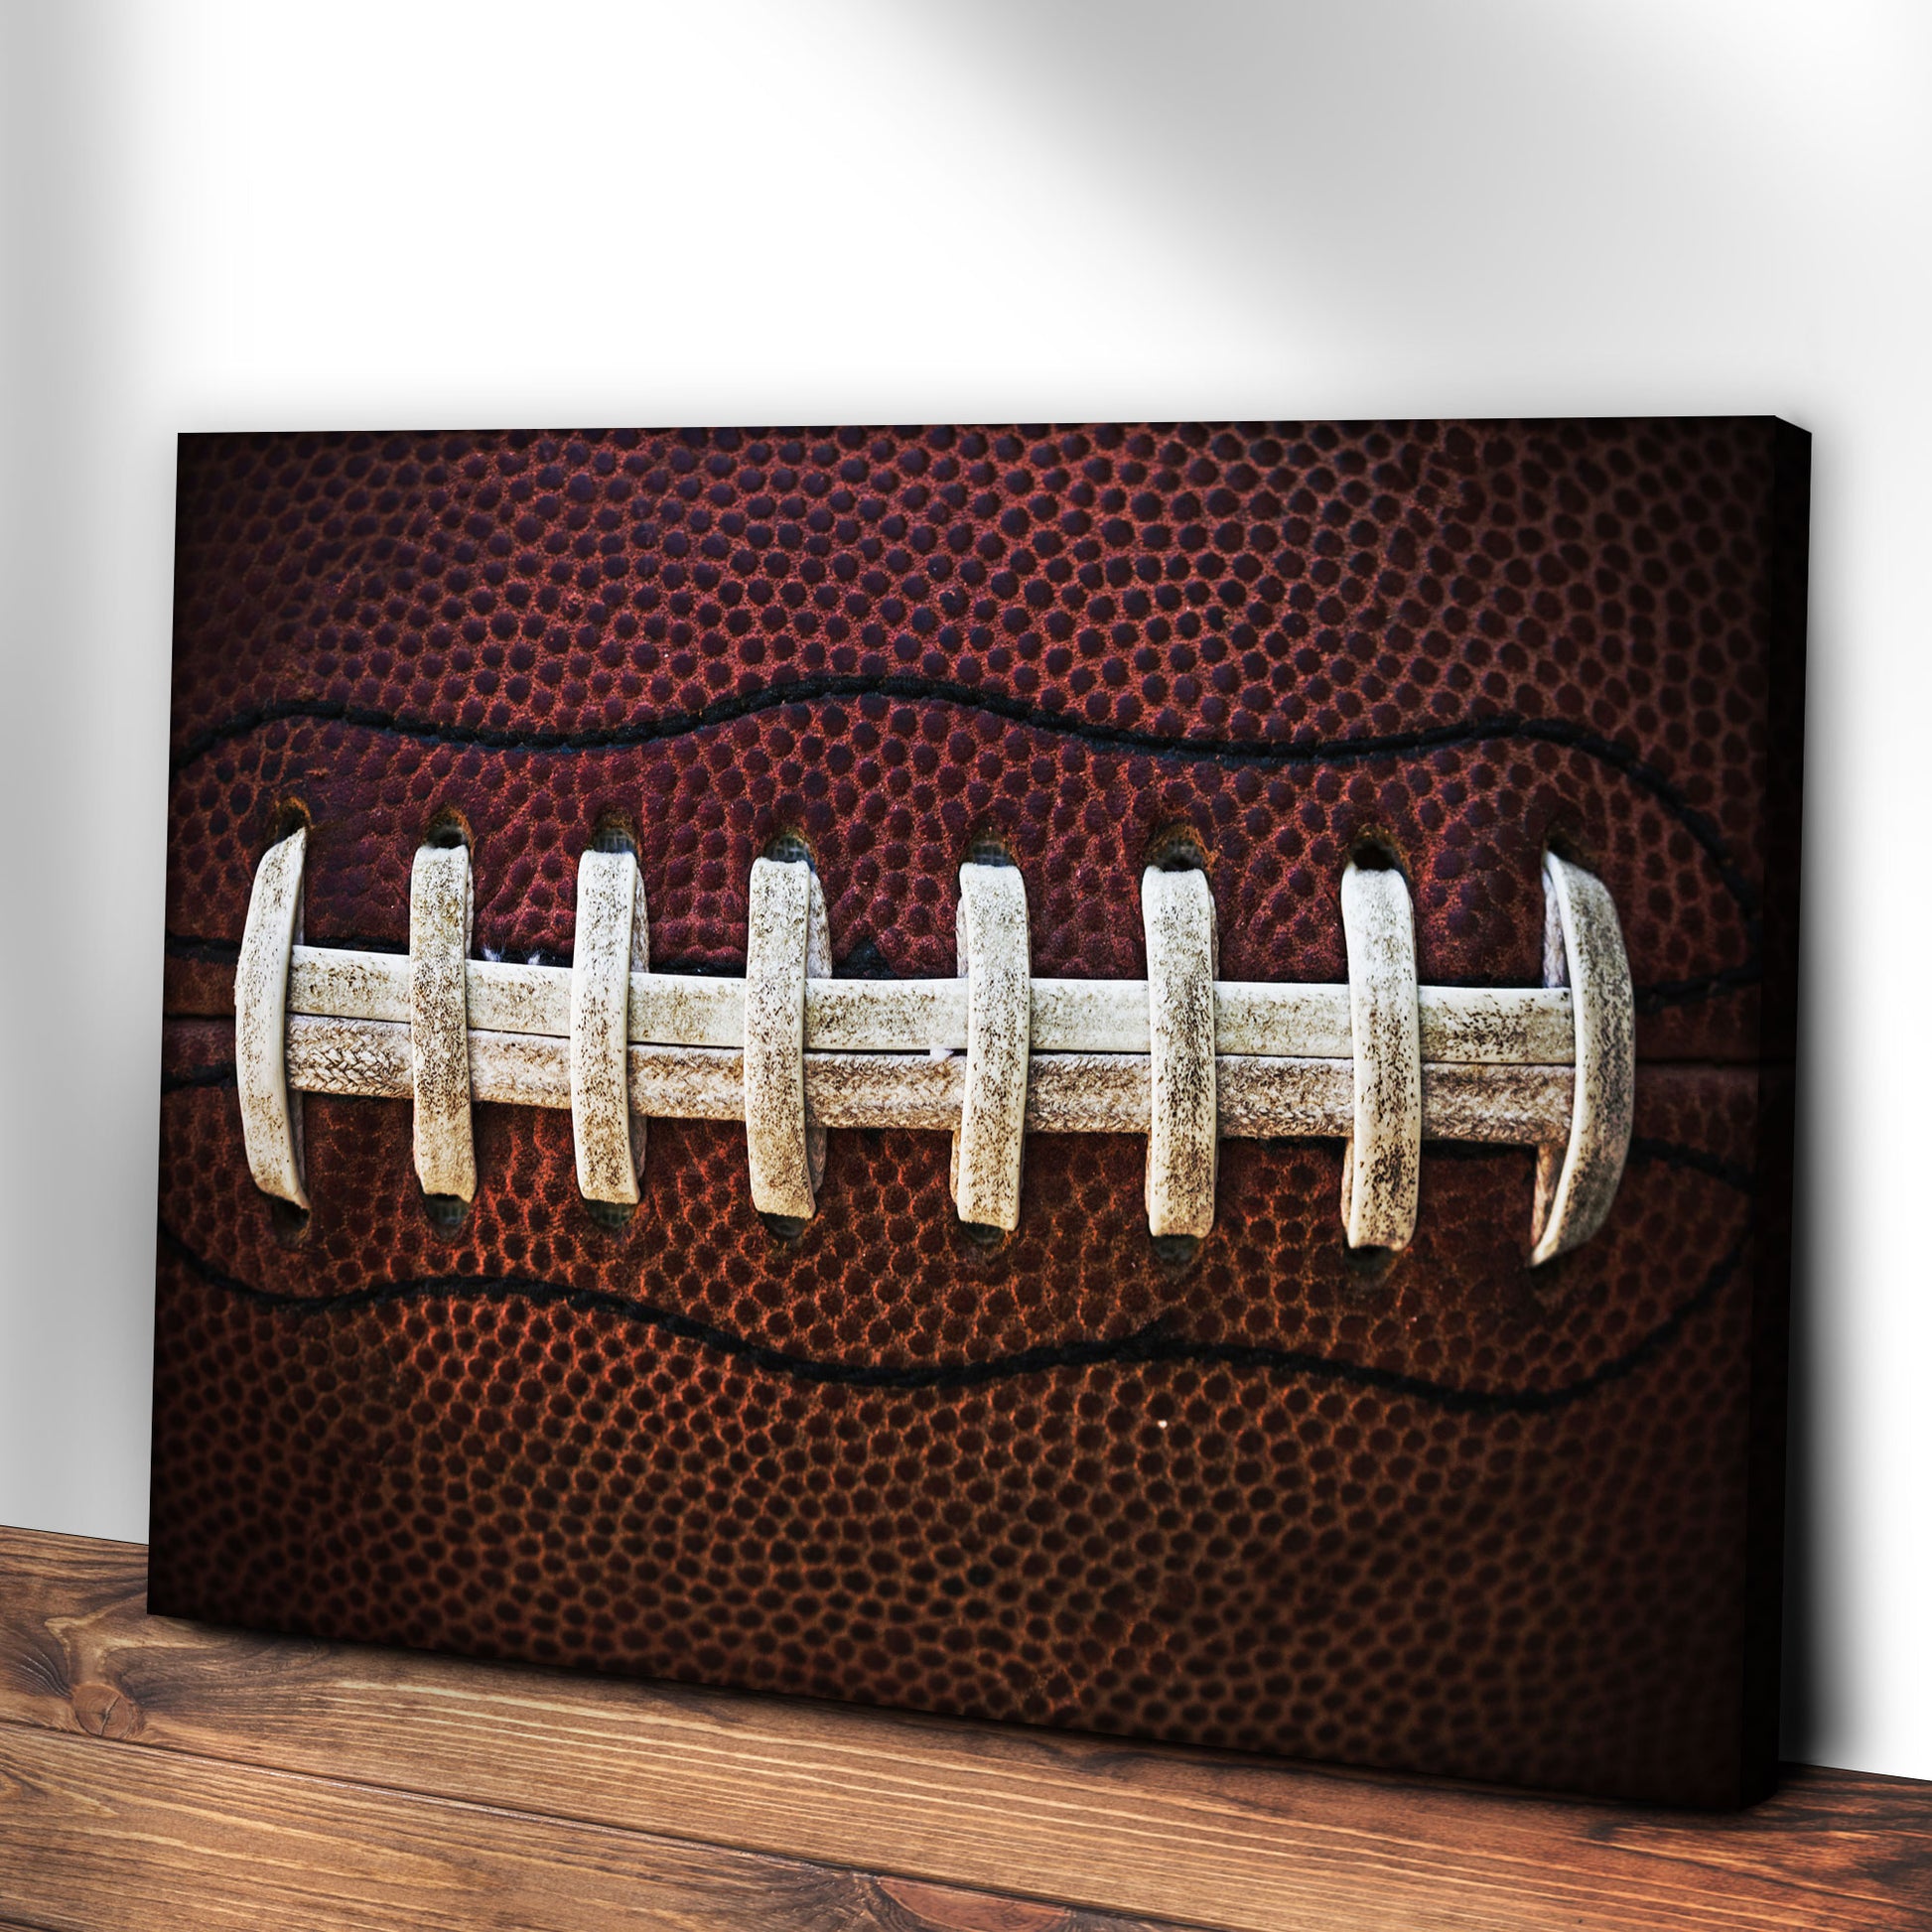 Football Laces Canvas Wall Art Style 2 - Image by Tailored Canvases